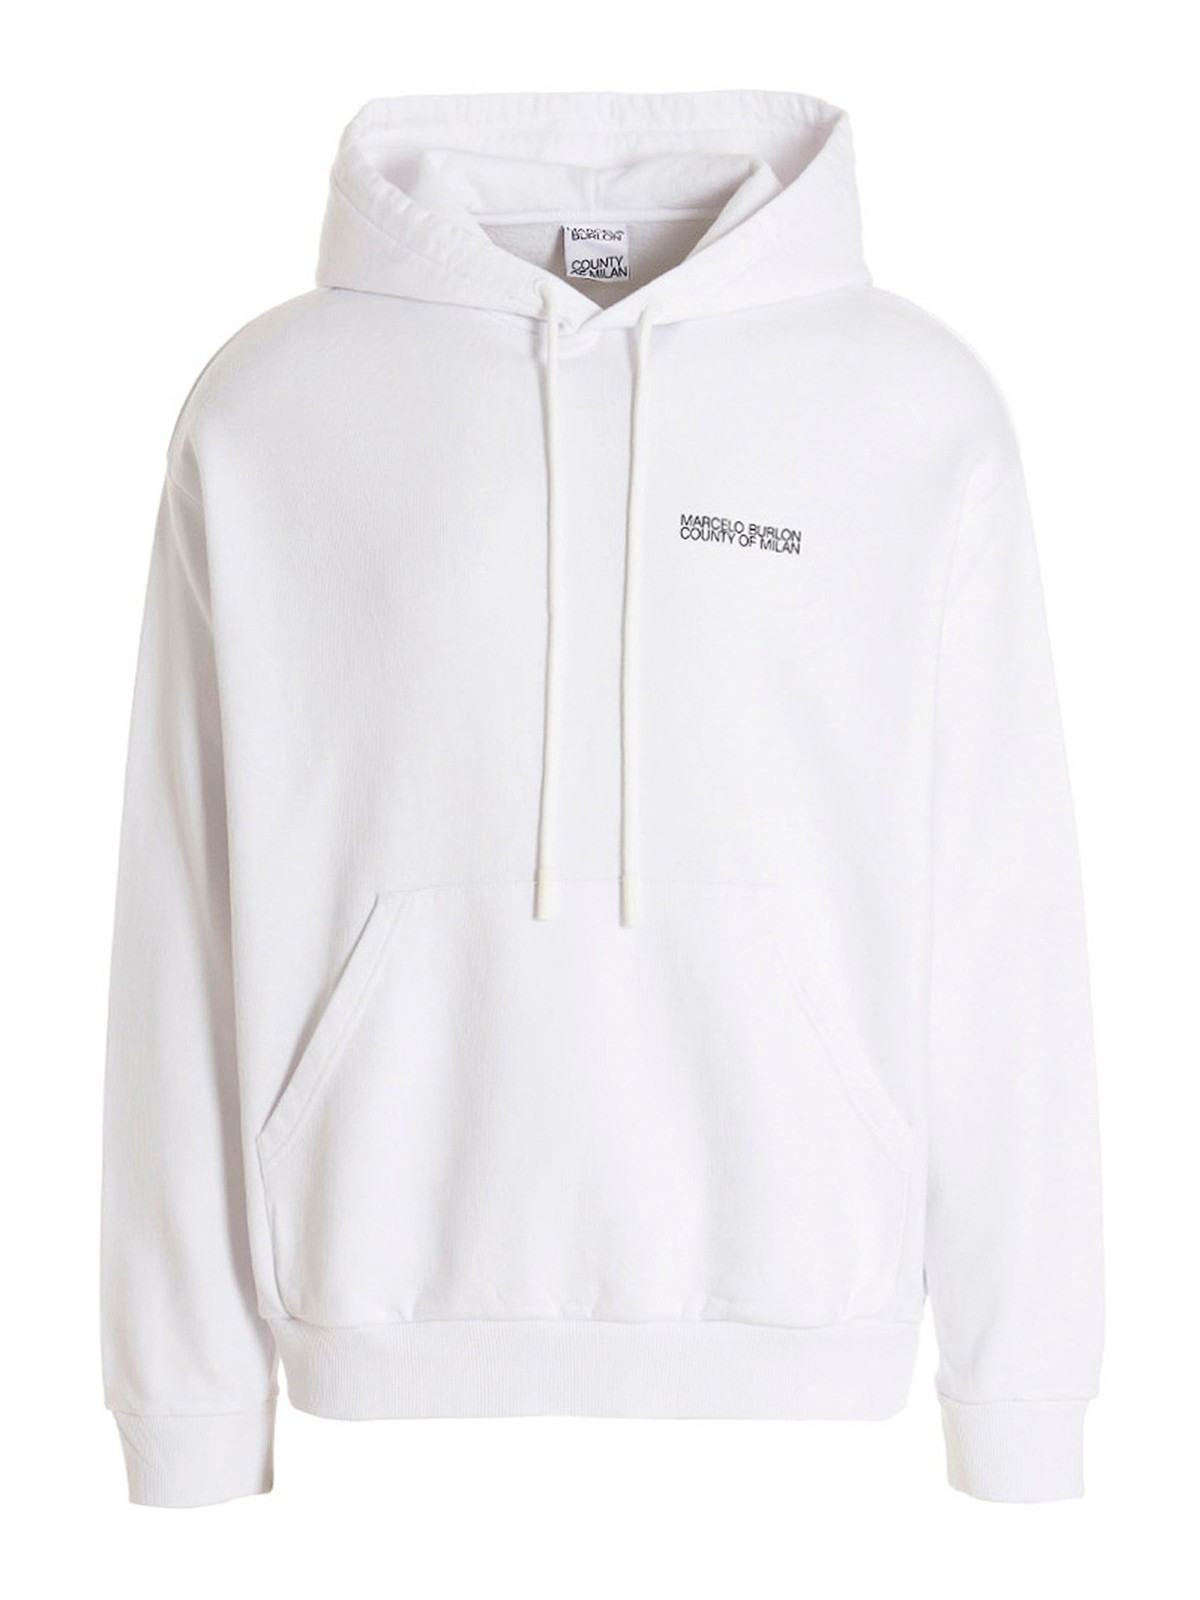 Marcelo Burlon County Of Milan Tempera Cross Hoodie With Pouch Pocket In White